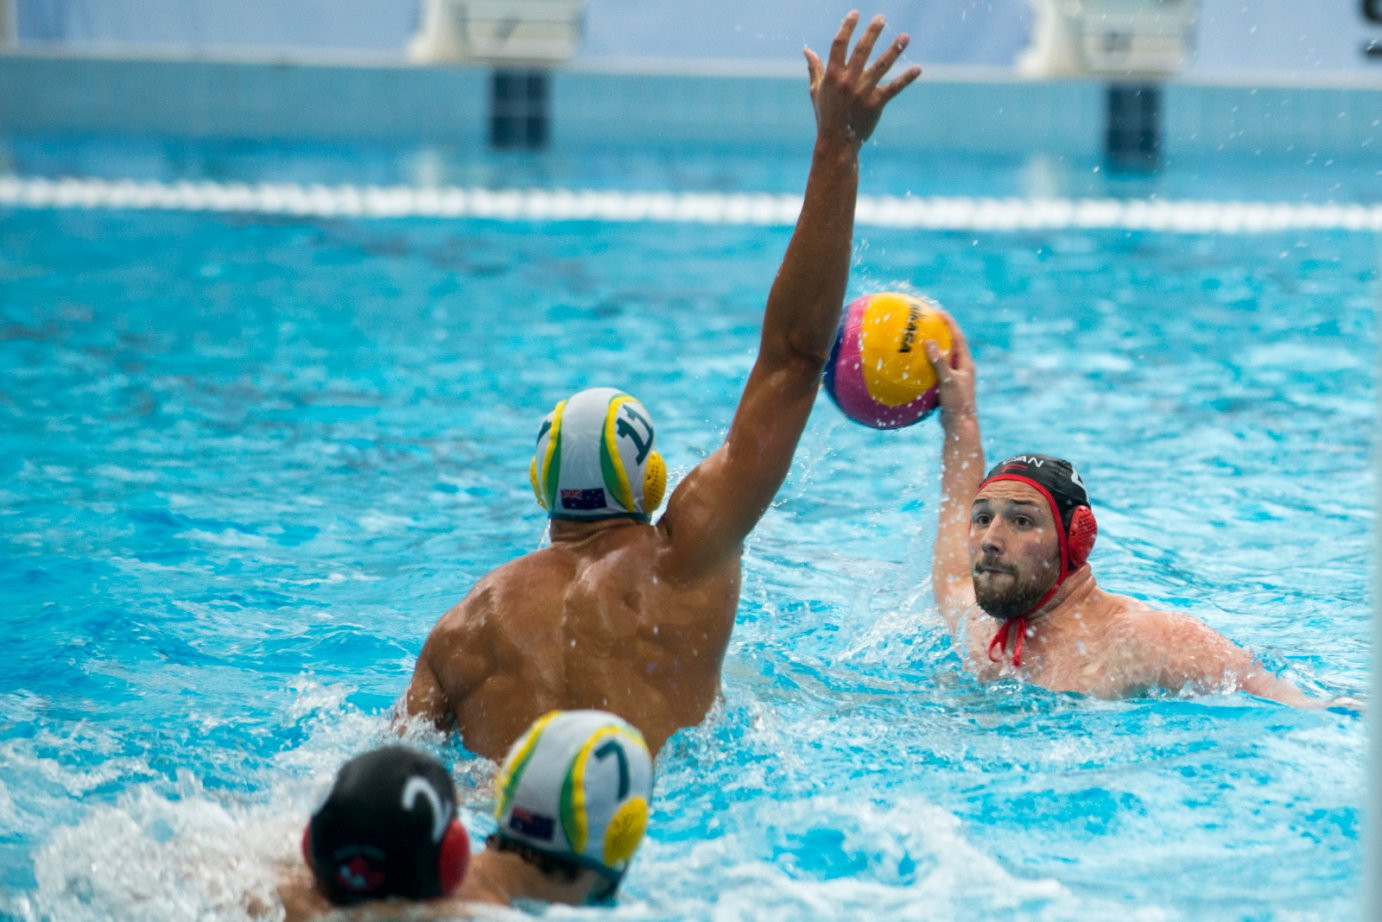 Australia's men have put themselves in a strong position in the Water Polo World League Intercontinental Cup ©FINA